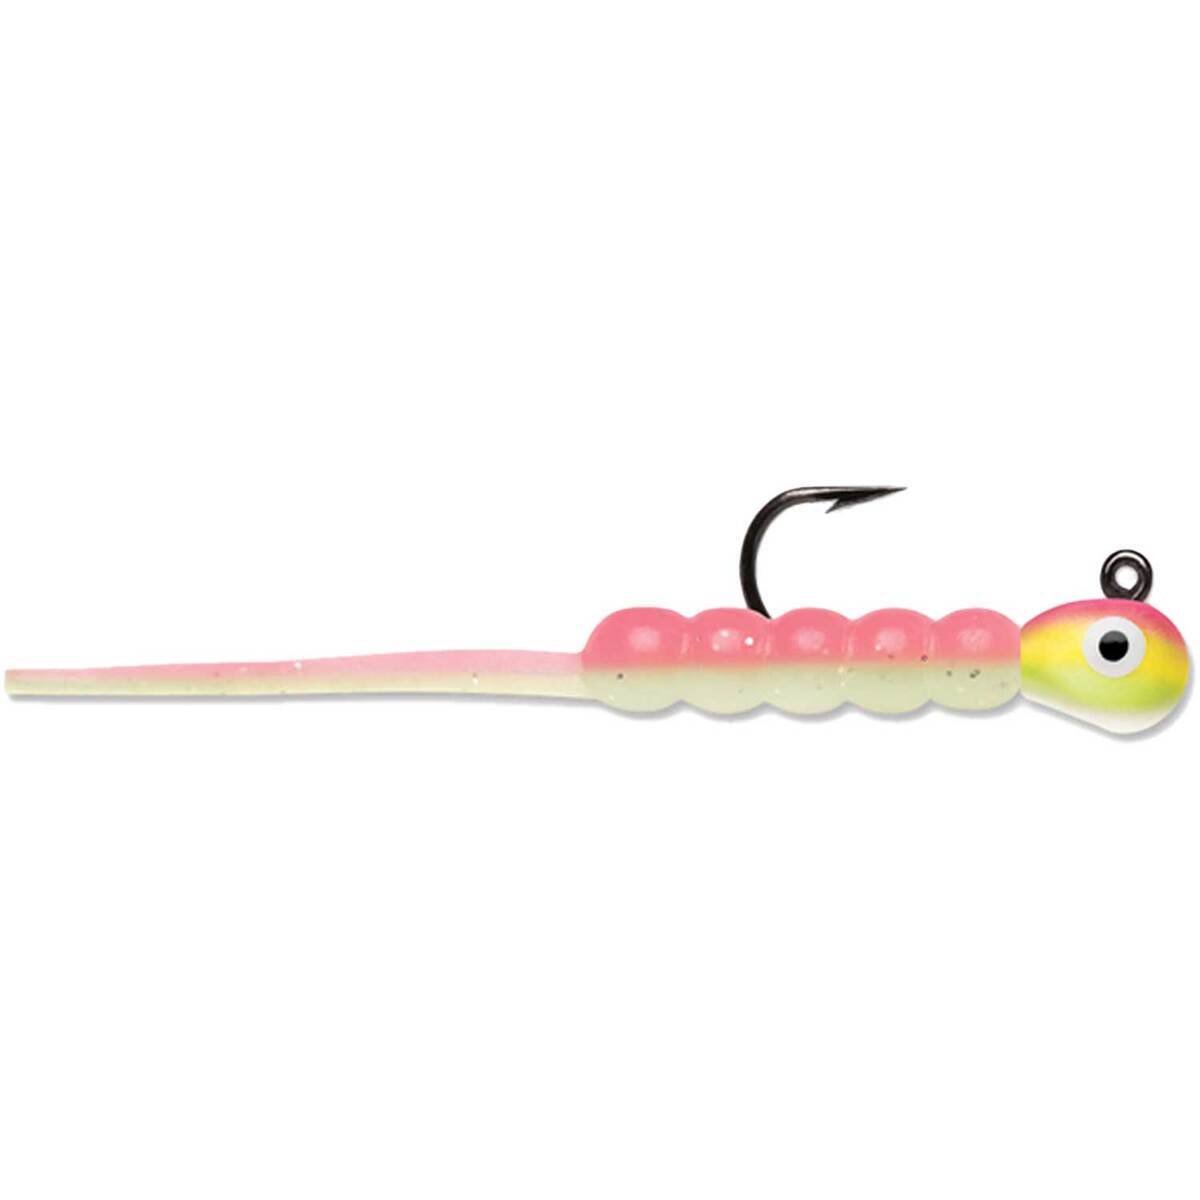 Area Trout Jig heads Decoy Hooks Tungsten weight Trout fishing